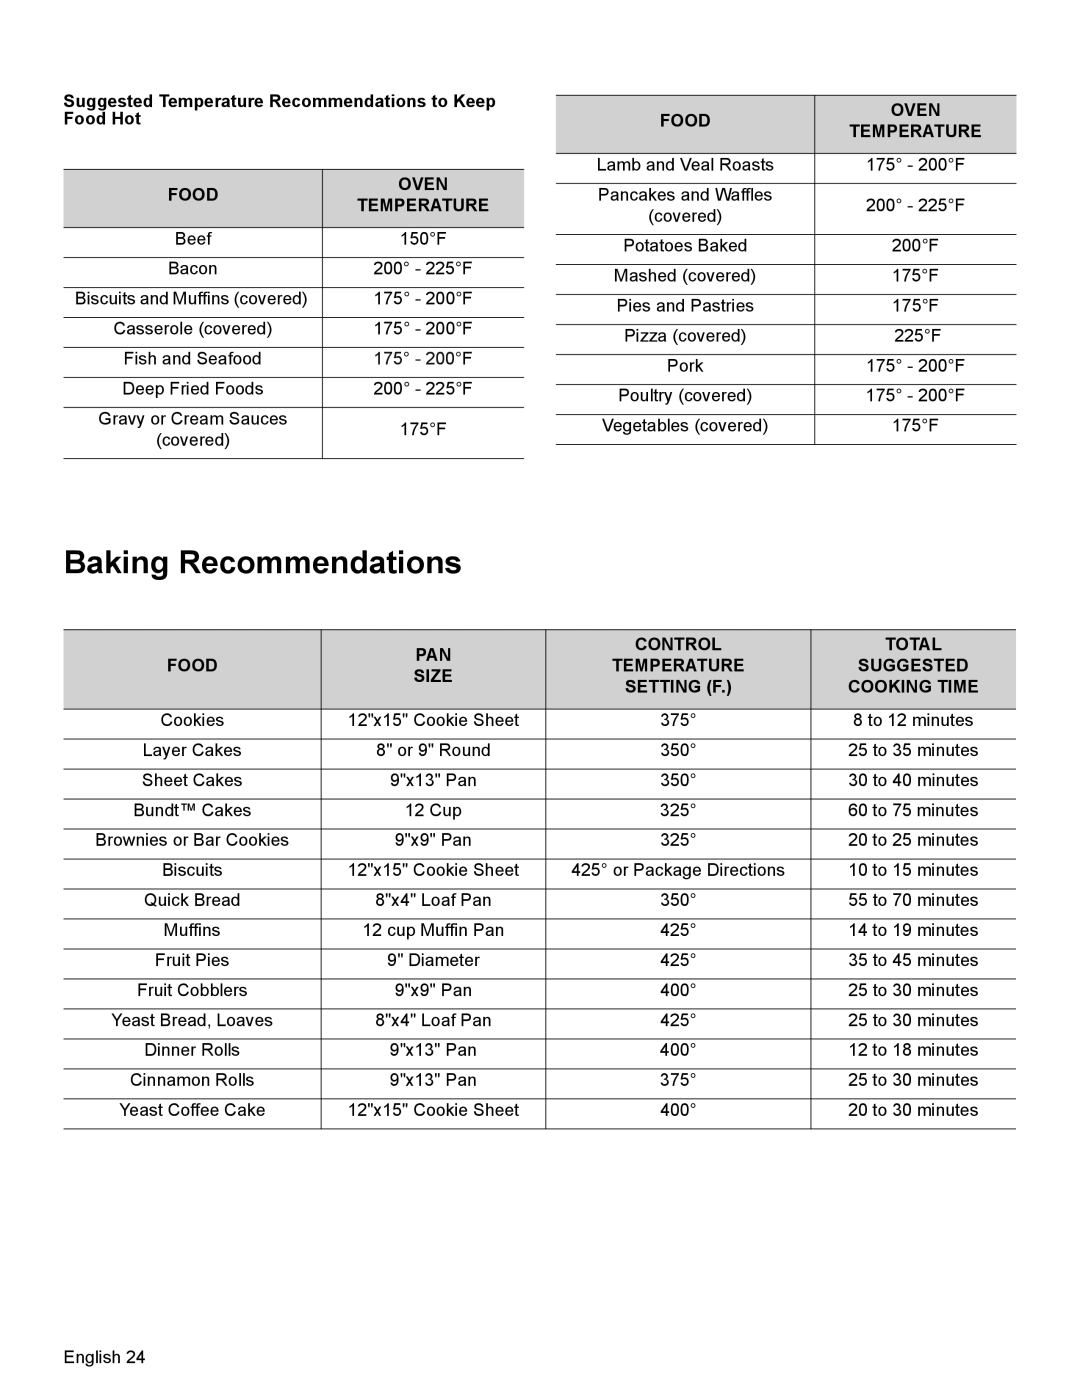 Thermador PRL30, PRL36, PRG30 manual Baking Recommendations, Biscuits 